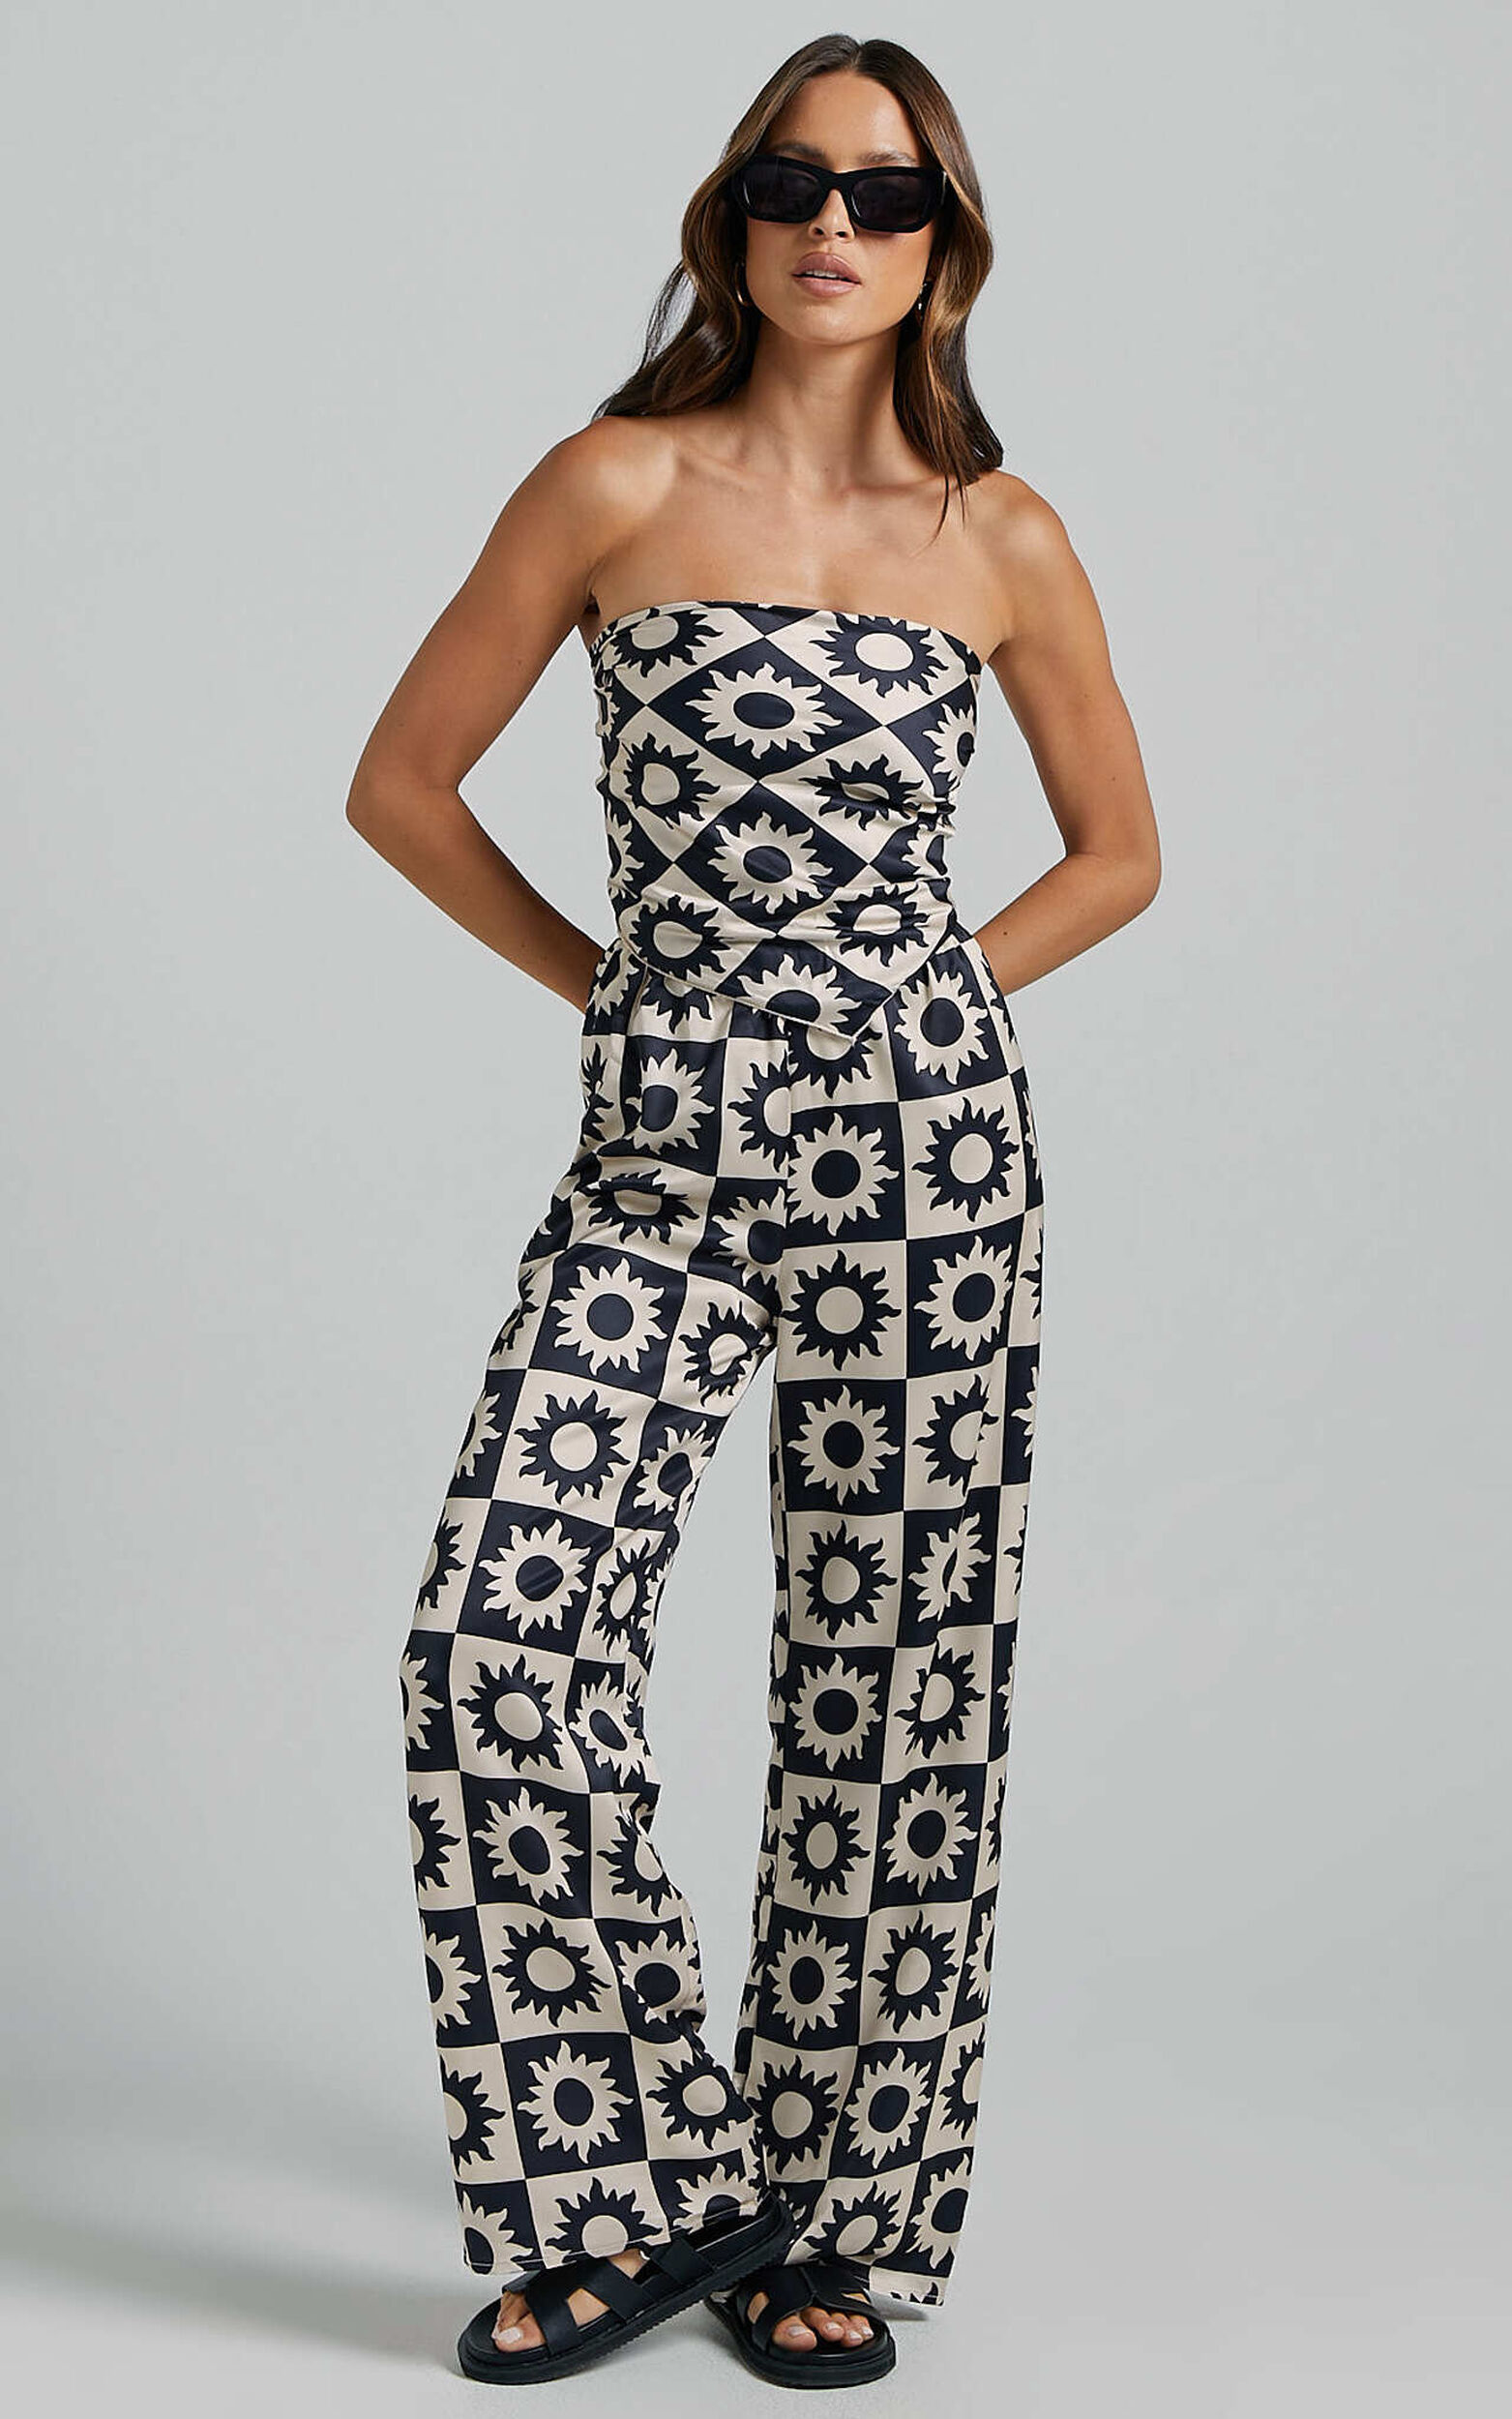 Augusta Two Piece Set - Scarf Top and Pants Two Piece Set in Black and Cream Print - 06, BLK1